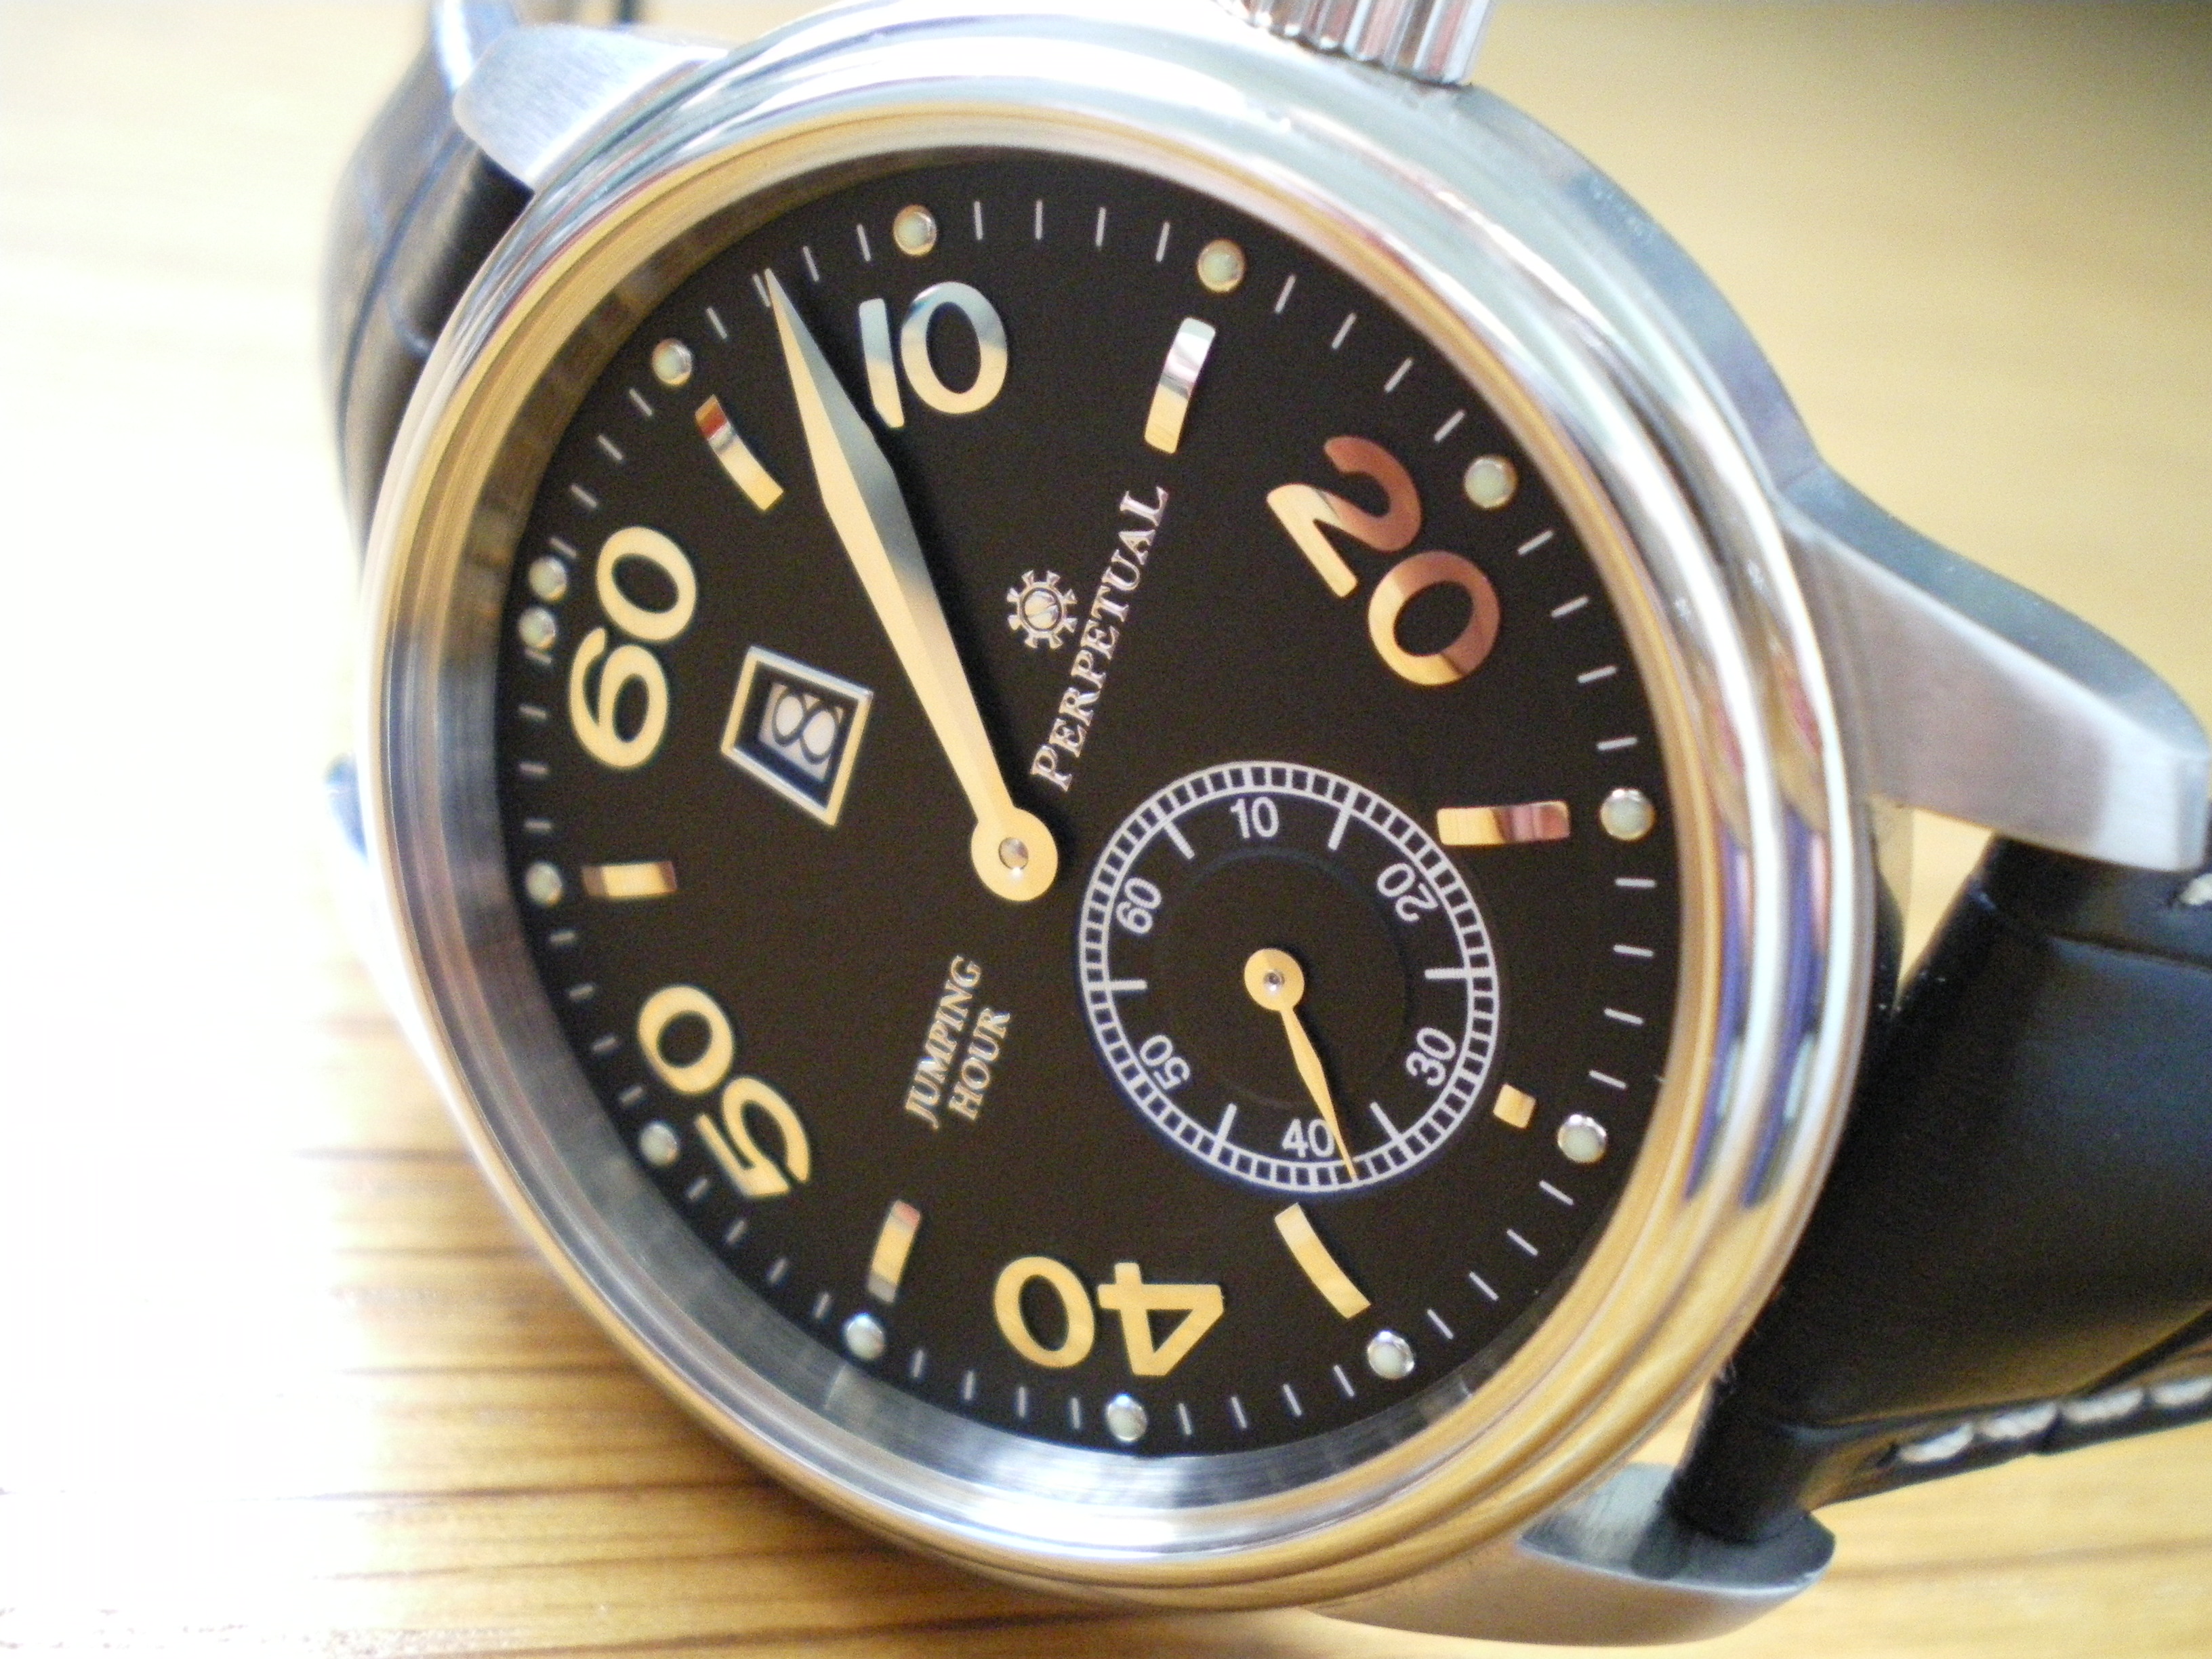 gmt 8 time zone